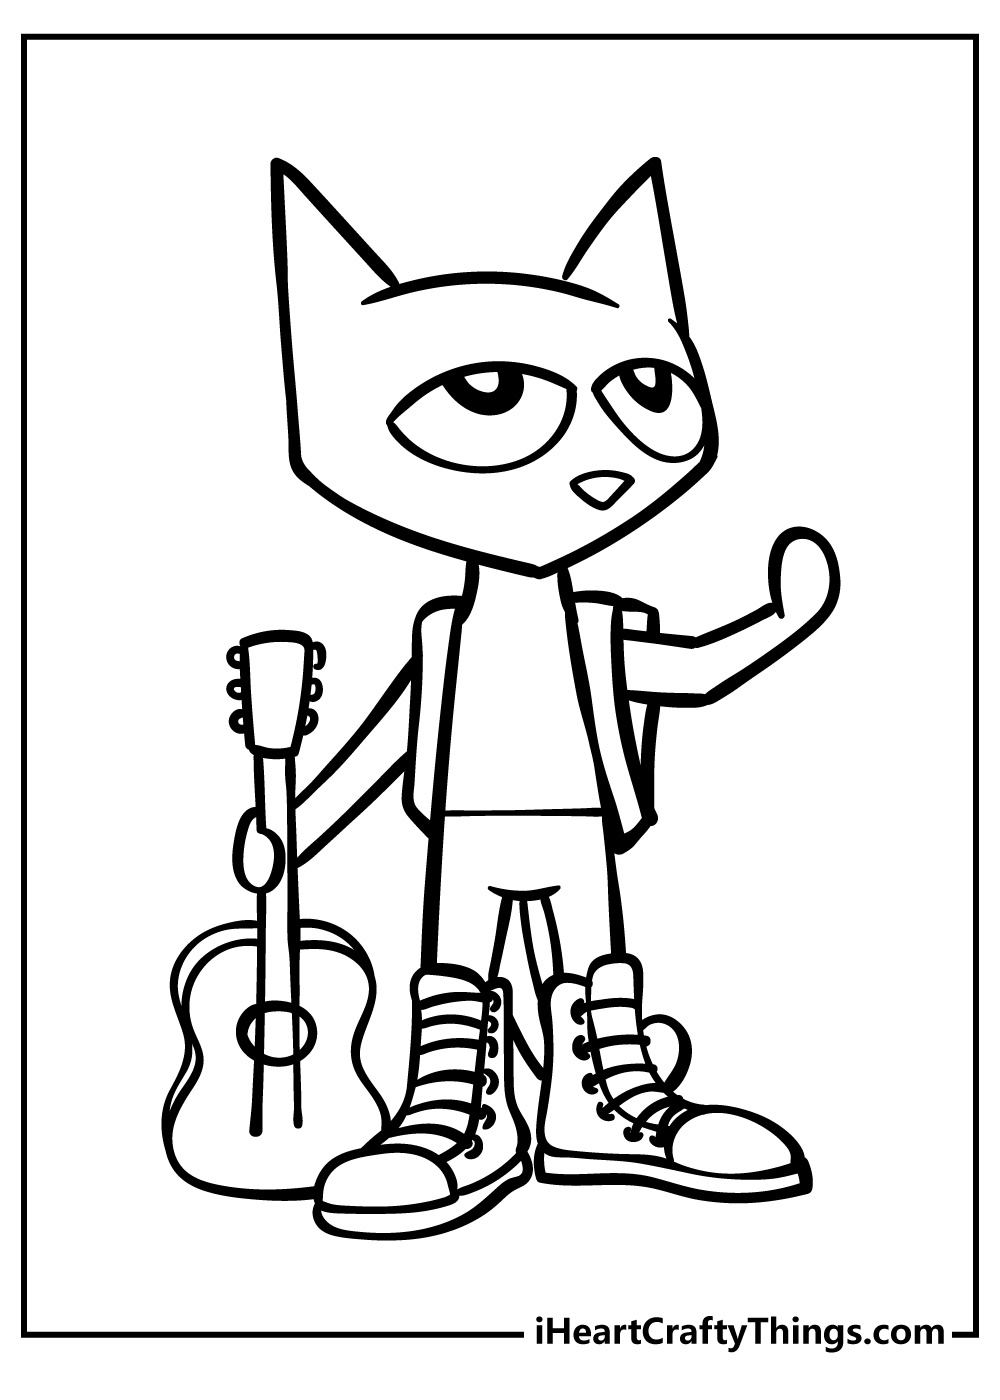 Pete the cat coloring pages free printables